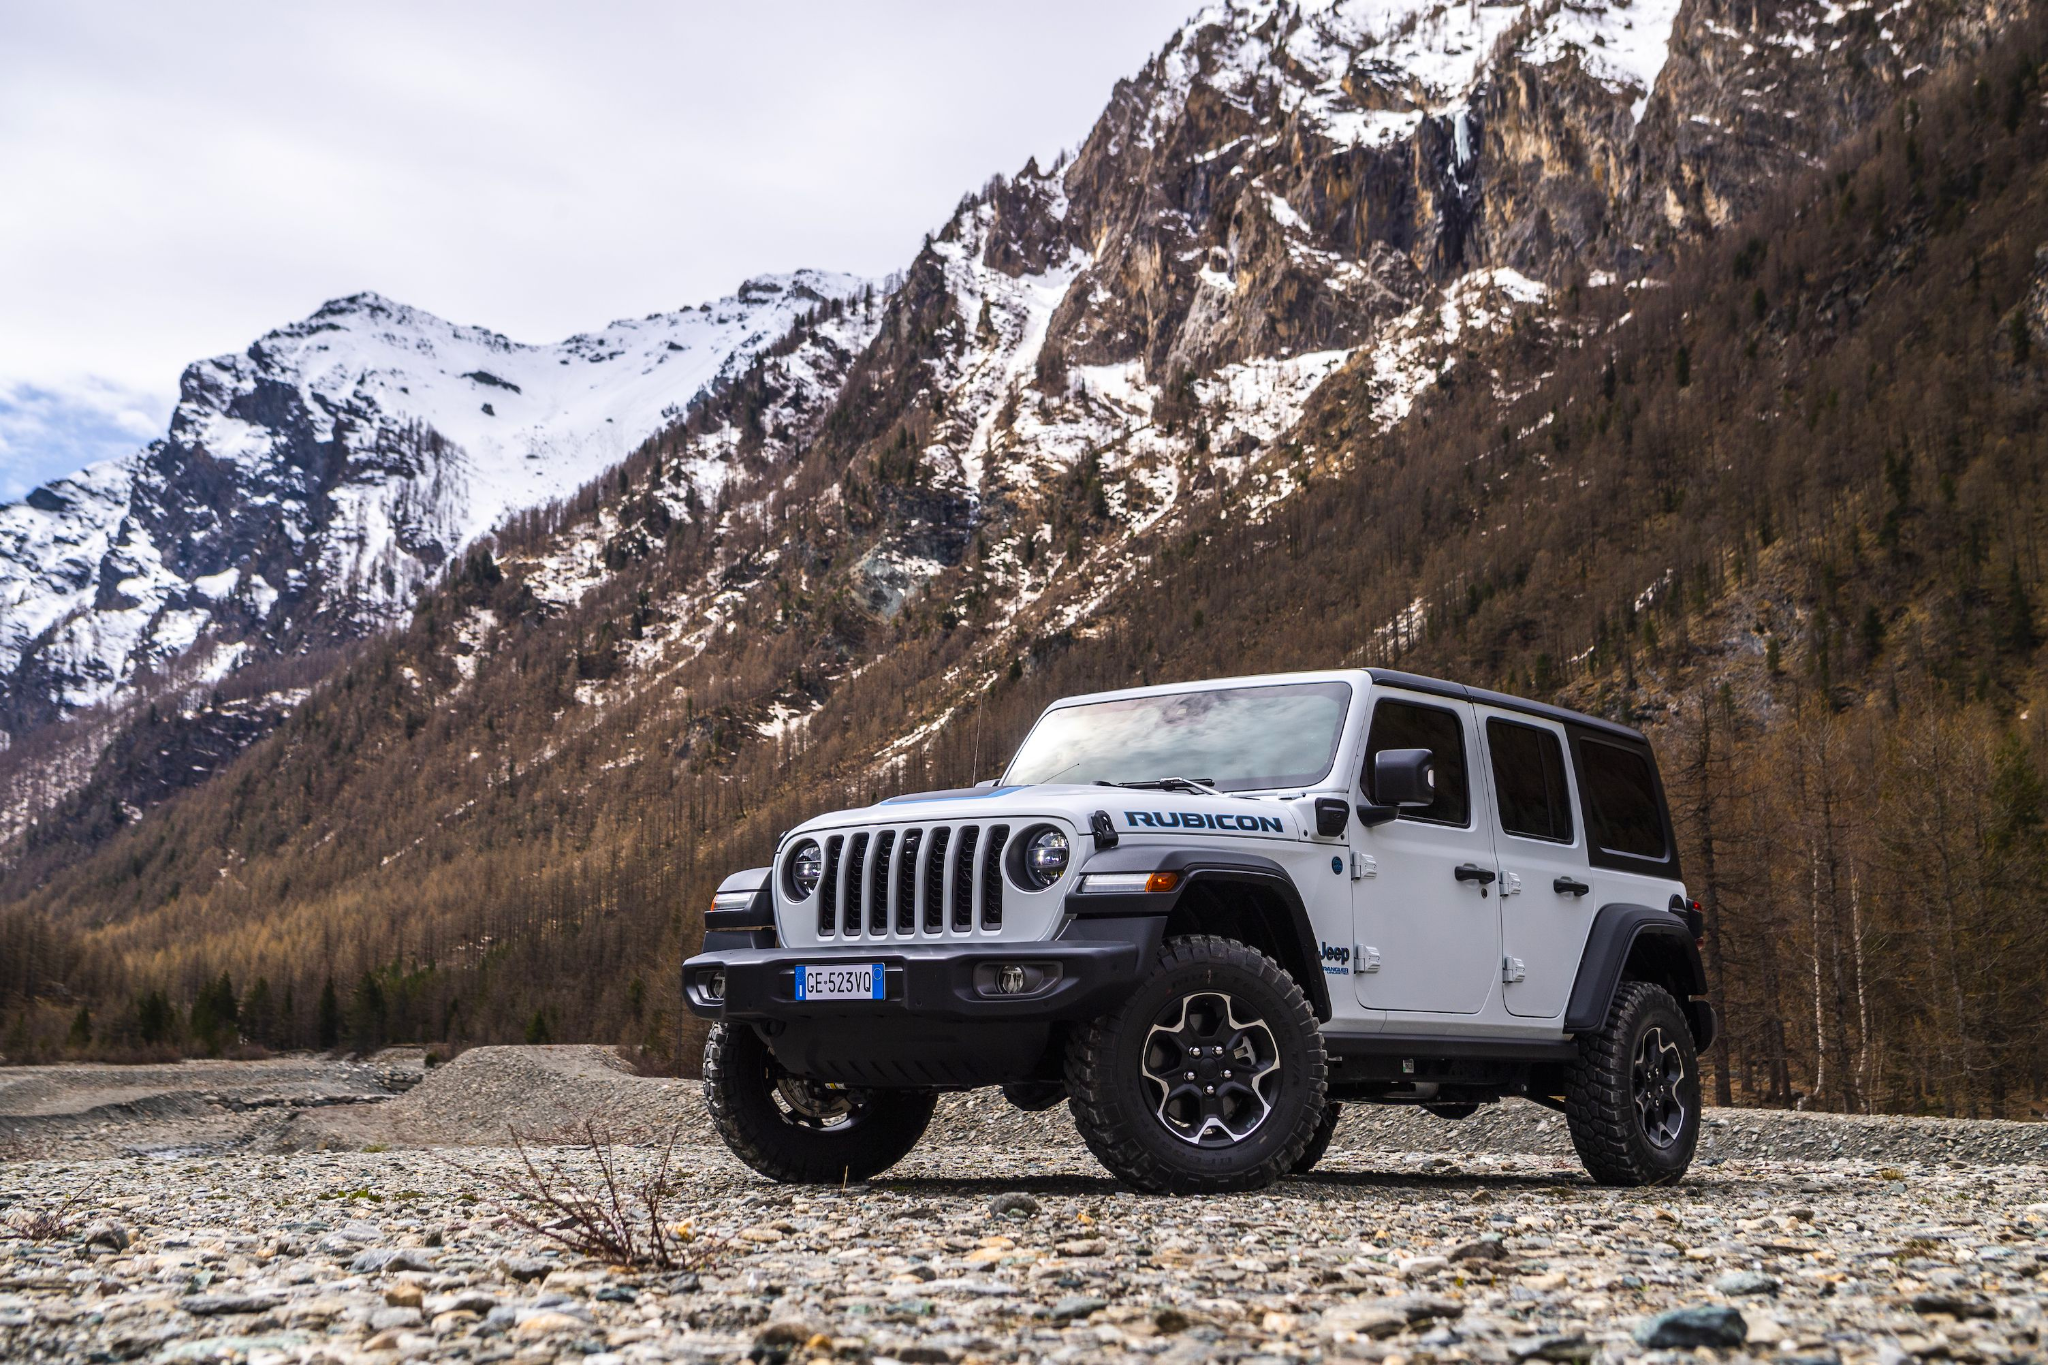 Tips for Off-Roading in a Jeep Wrangler